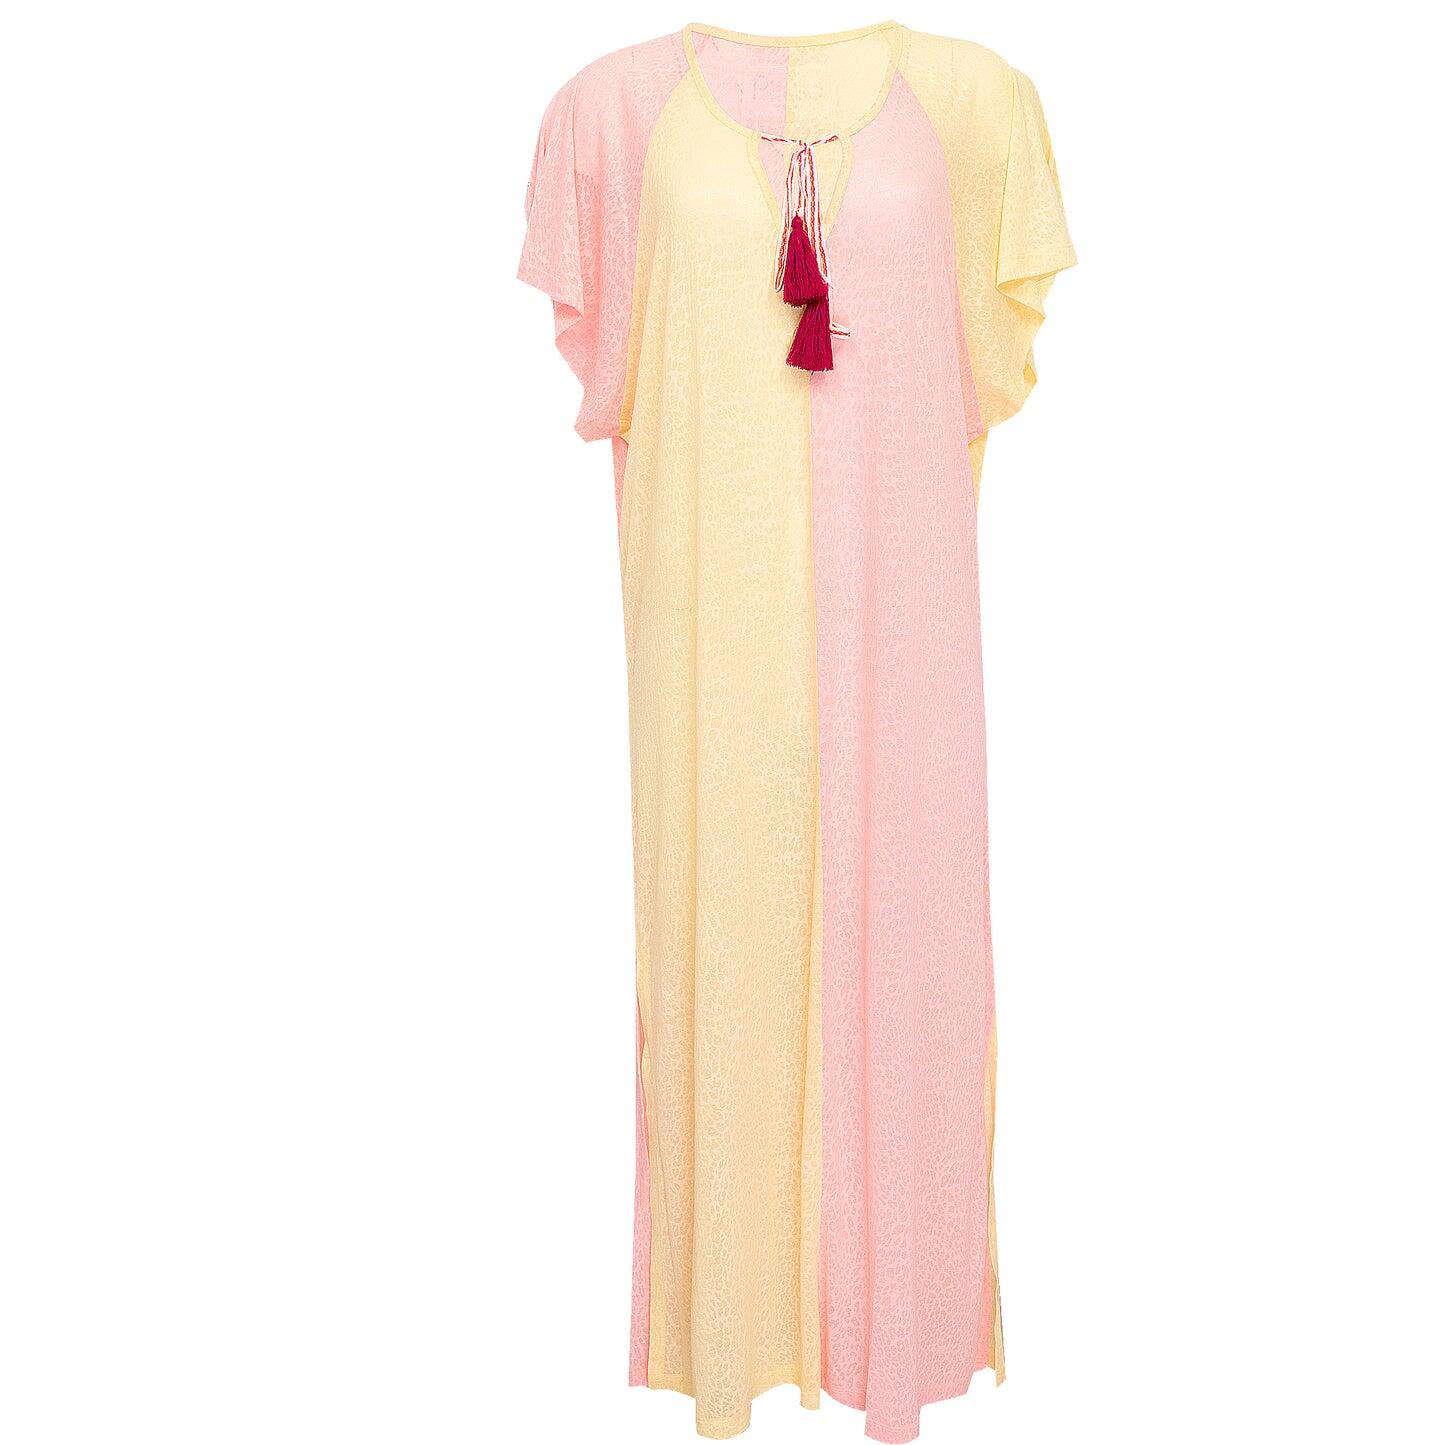  Casual Pink and Yellow Dress in a maxi style